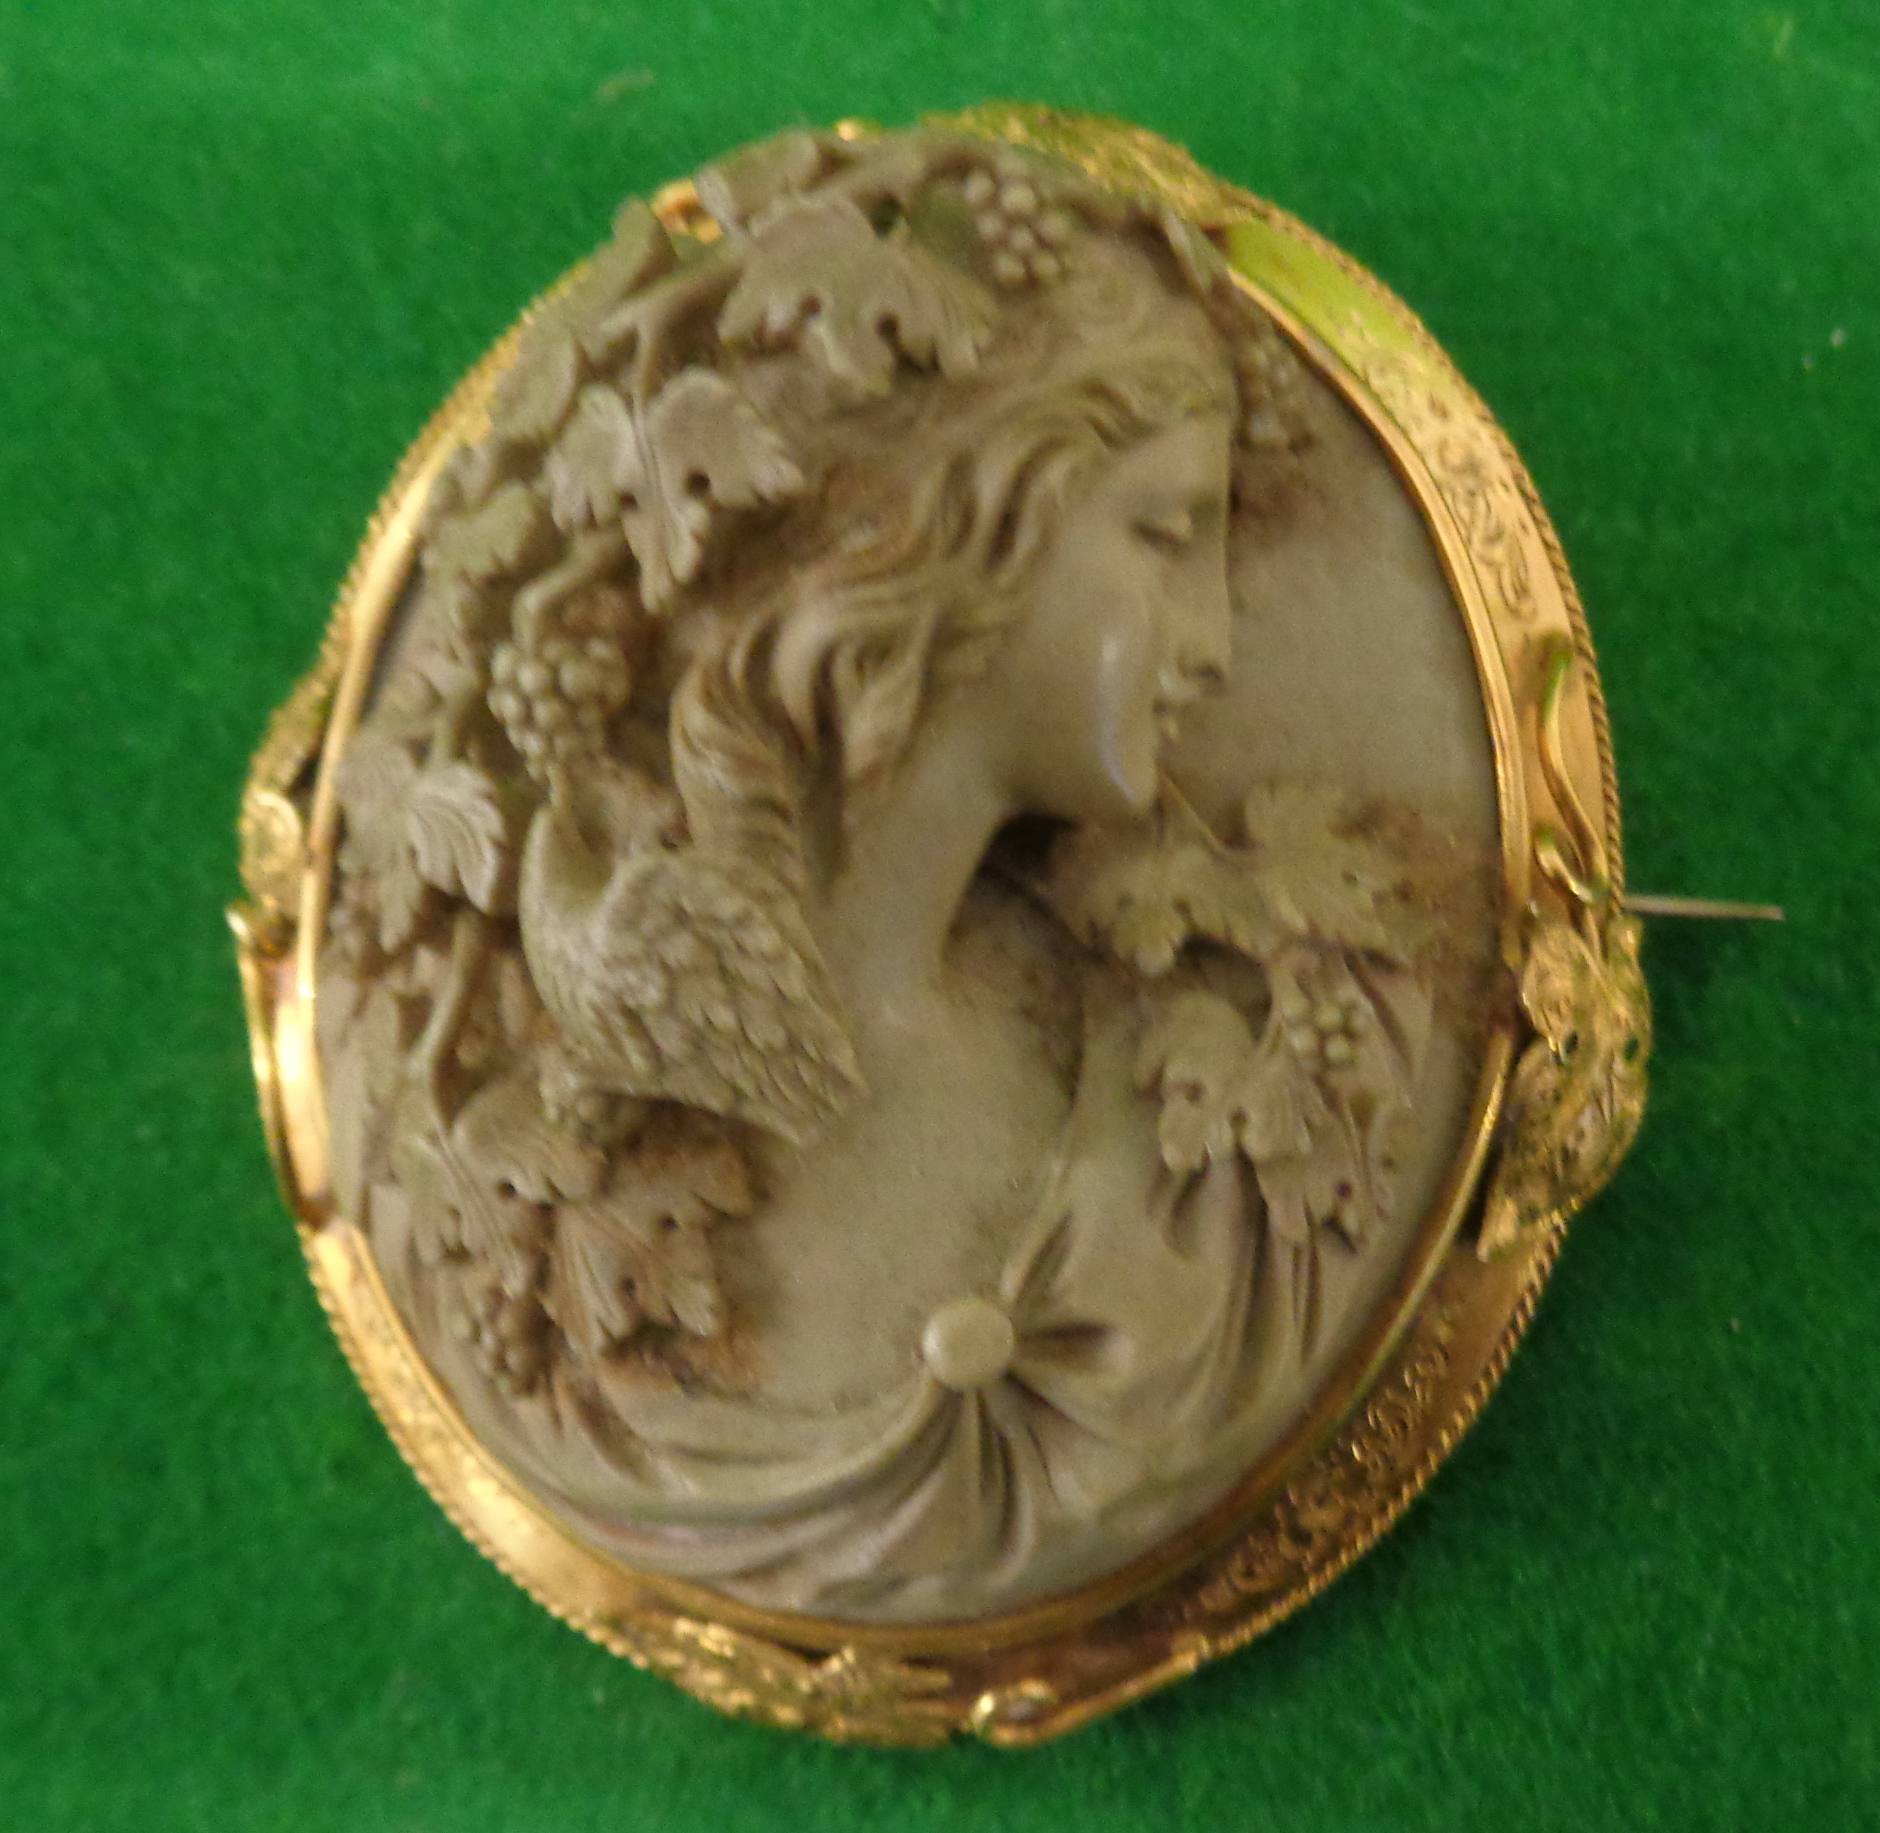 Victorian gold-mounted high relief lava cameo of a pre-Raphaelite lady's head, 5.25cm x 4.5cm